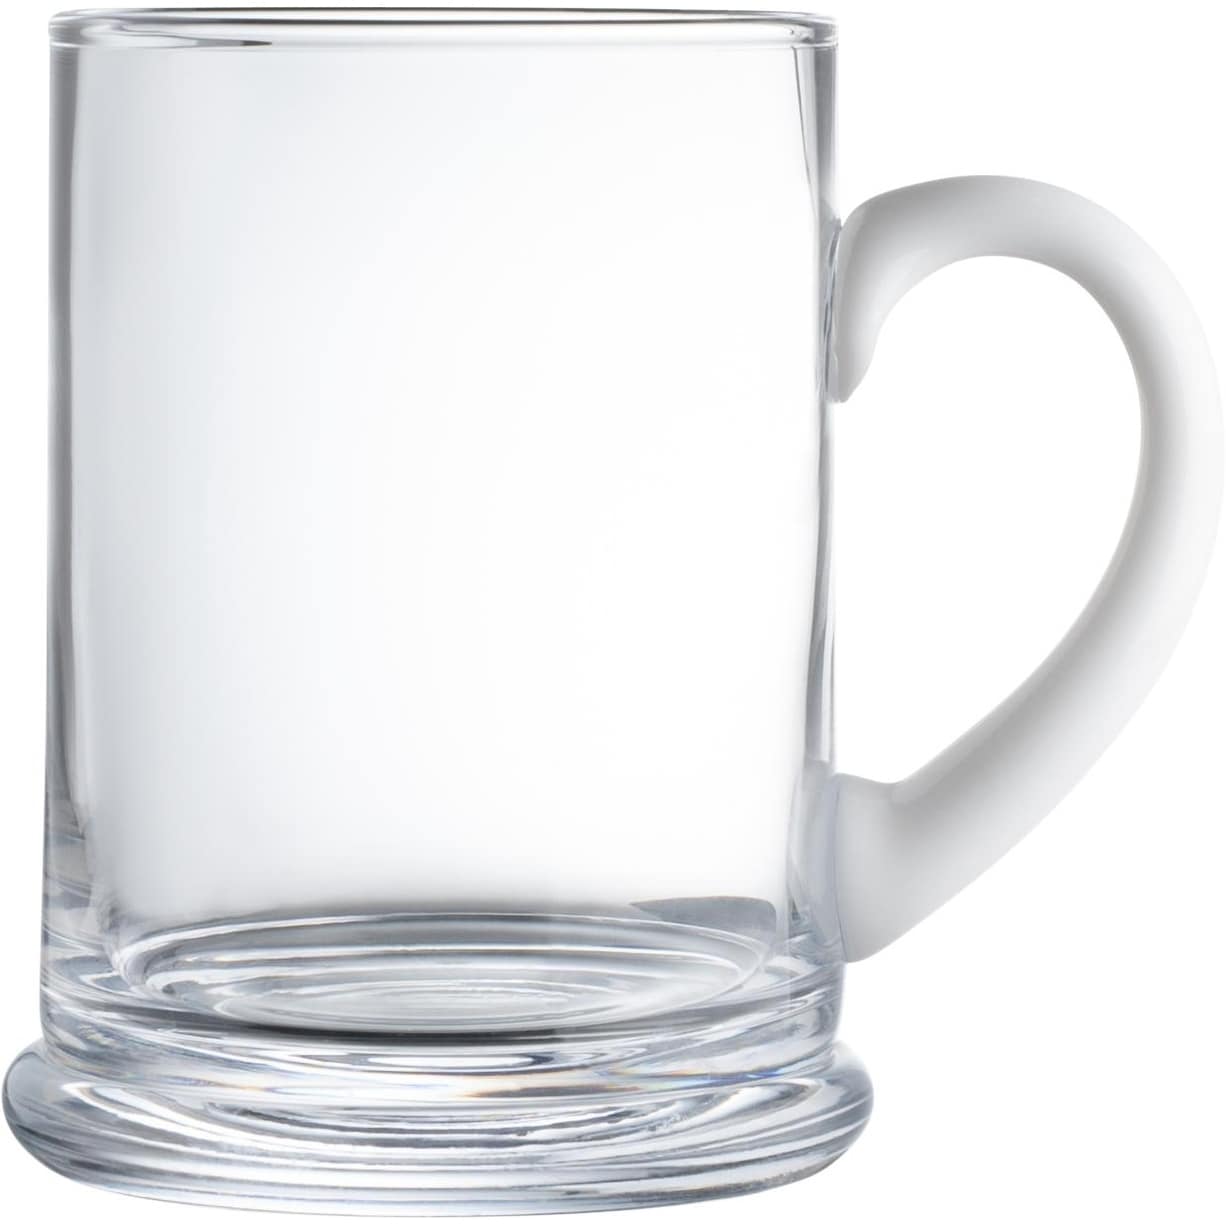 https://ak1.ostkcdn.com/images/products/is/images/direct/ca8f1ccad0d8eb9c5c242f71e029abe34acffff4/Majestic-Gifts-Inc.-European-24-oz.-Glass-Mug-with-white-handle.jpg